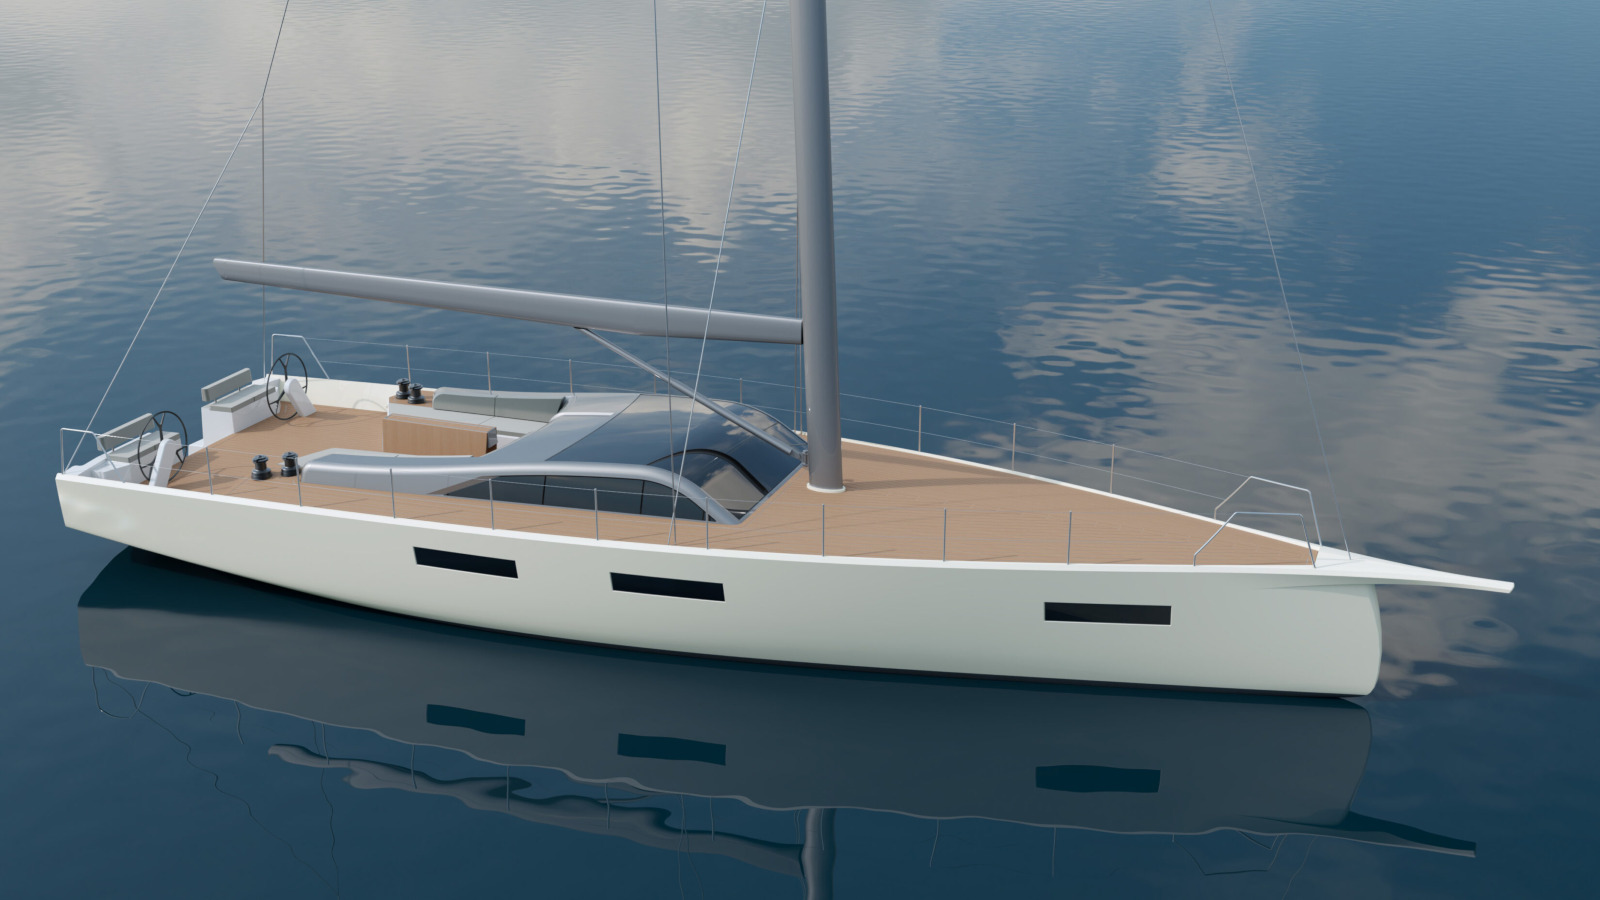 Yacht 3D Modeling with Rhino. Level 2